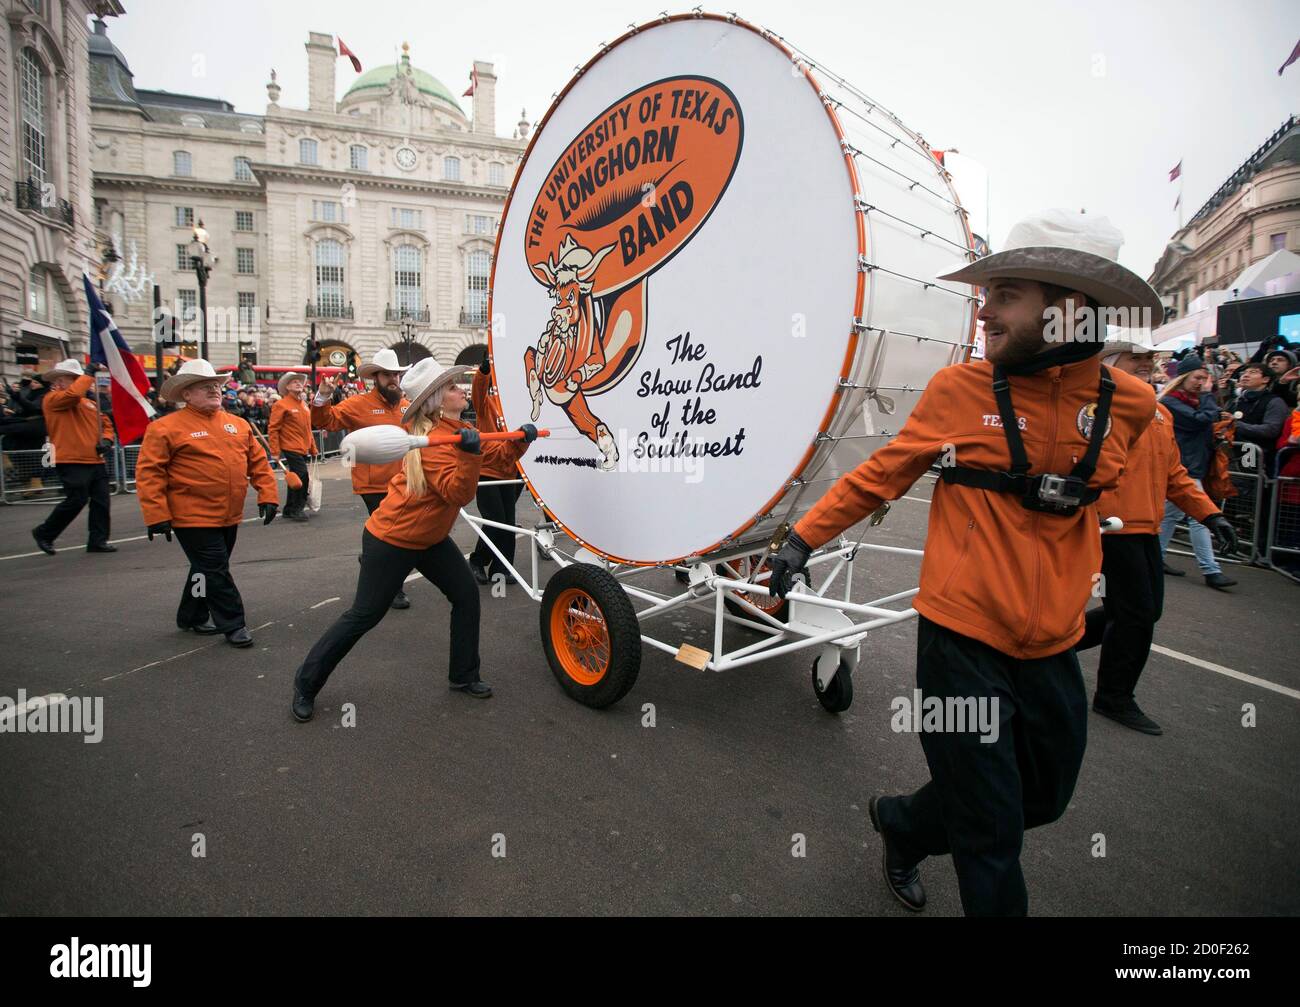 Members of The University of Texas Longhorn Alumni Band perform with their bass drum, dubbed 'Big Bertha', during the annual New Year's Day Parade in London January 1, 2015. REUTERS/Peter Nicholls (BRITAIN - Tags: SOCIETY ANNIVERSARY) Stock Photo